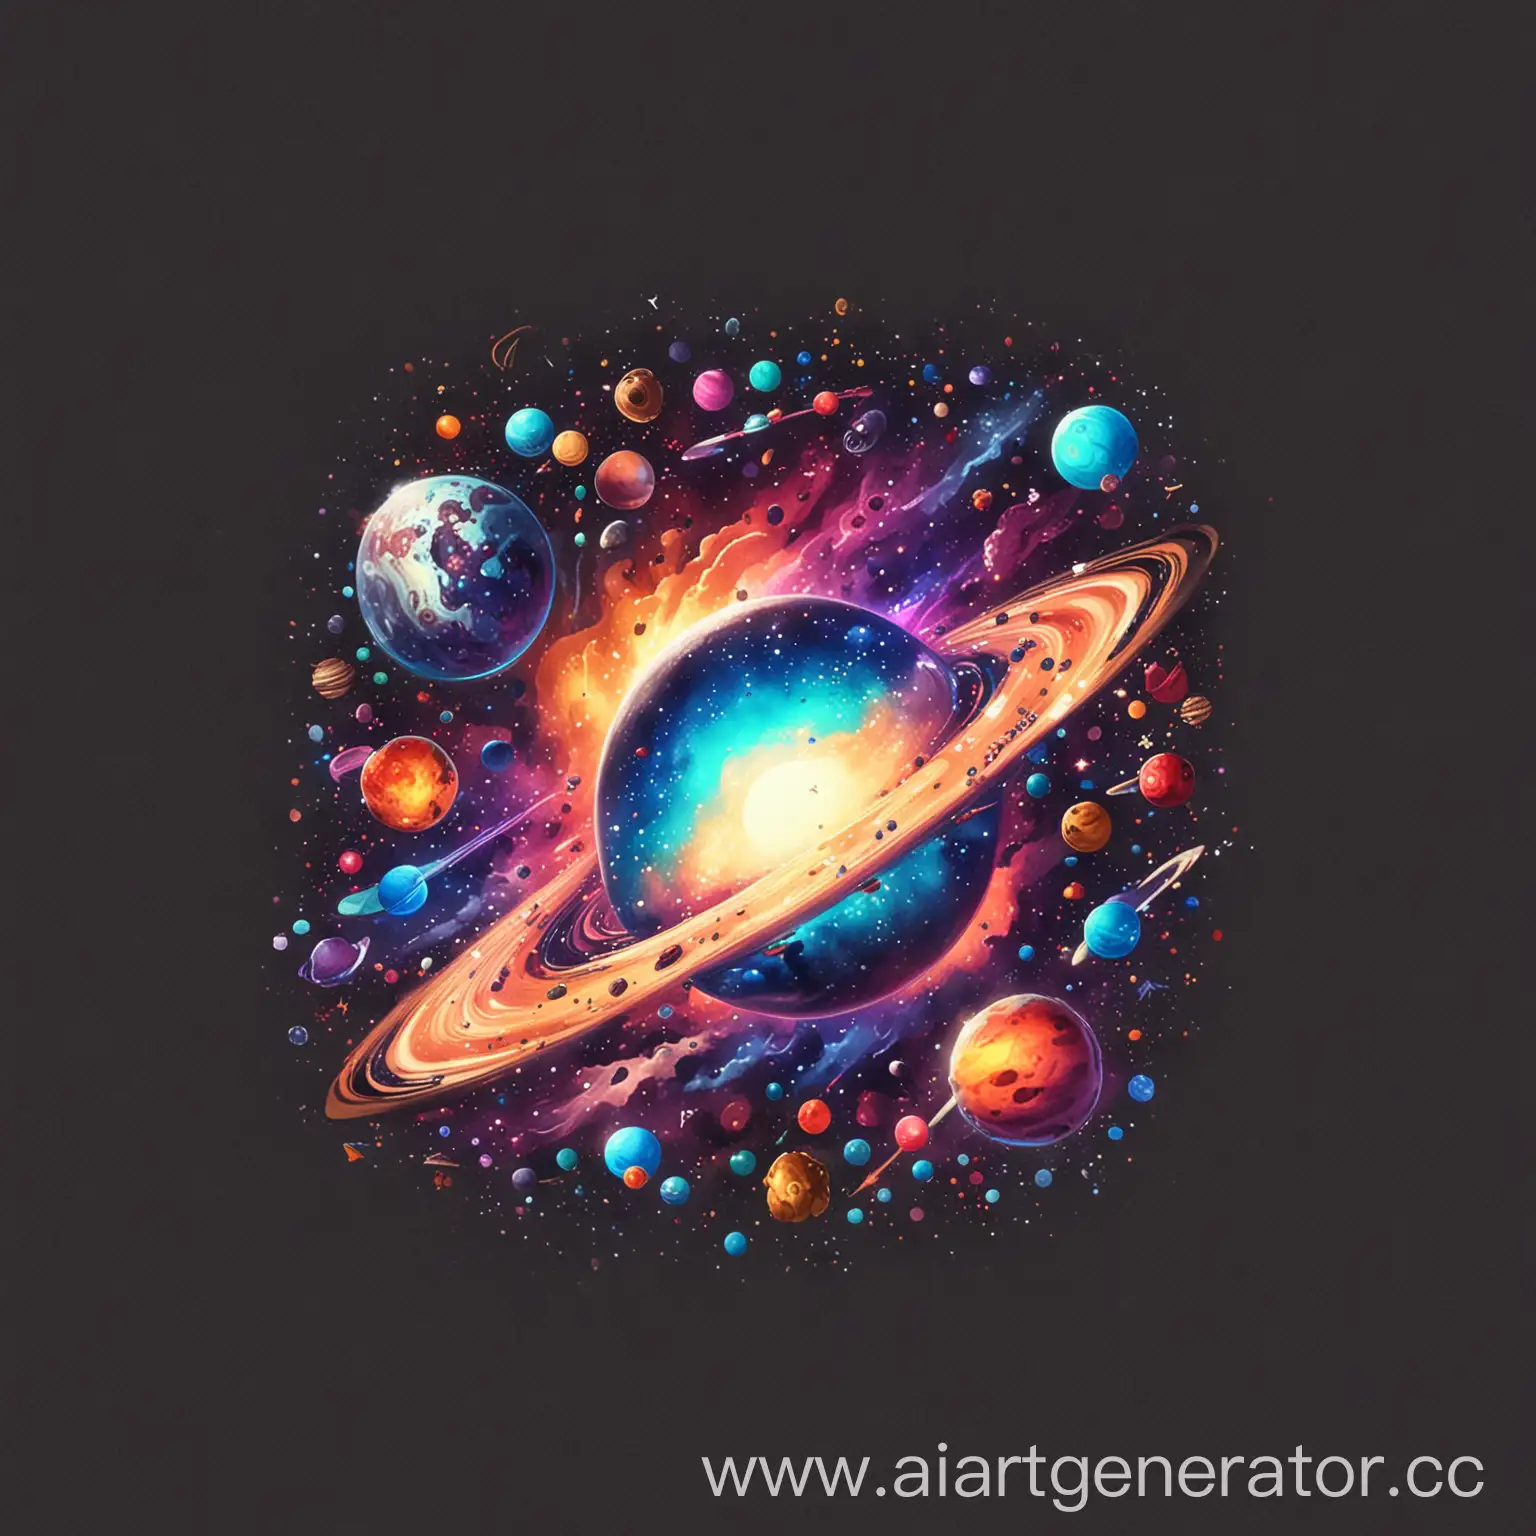 Colorful-Cartoon-Galaxy-with-Playful-Characters-and-Cosmic-Adventures